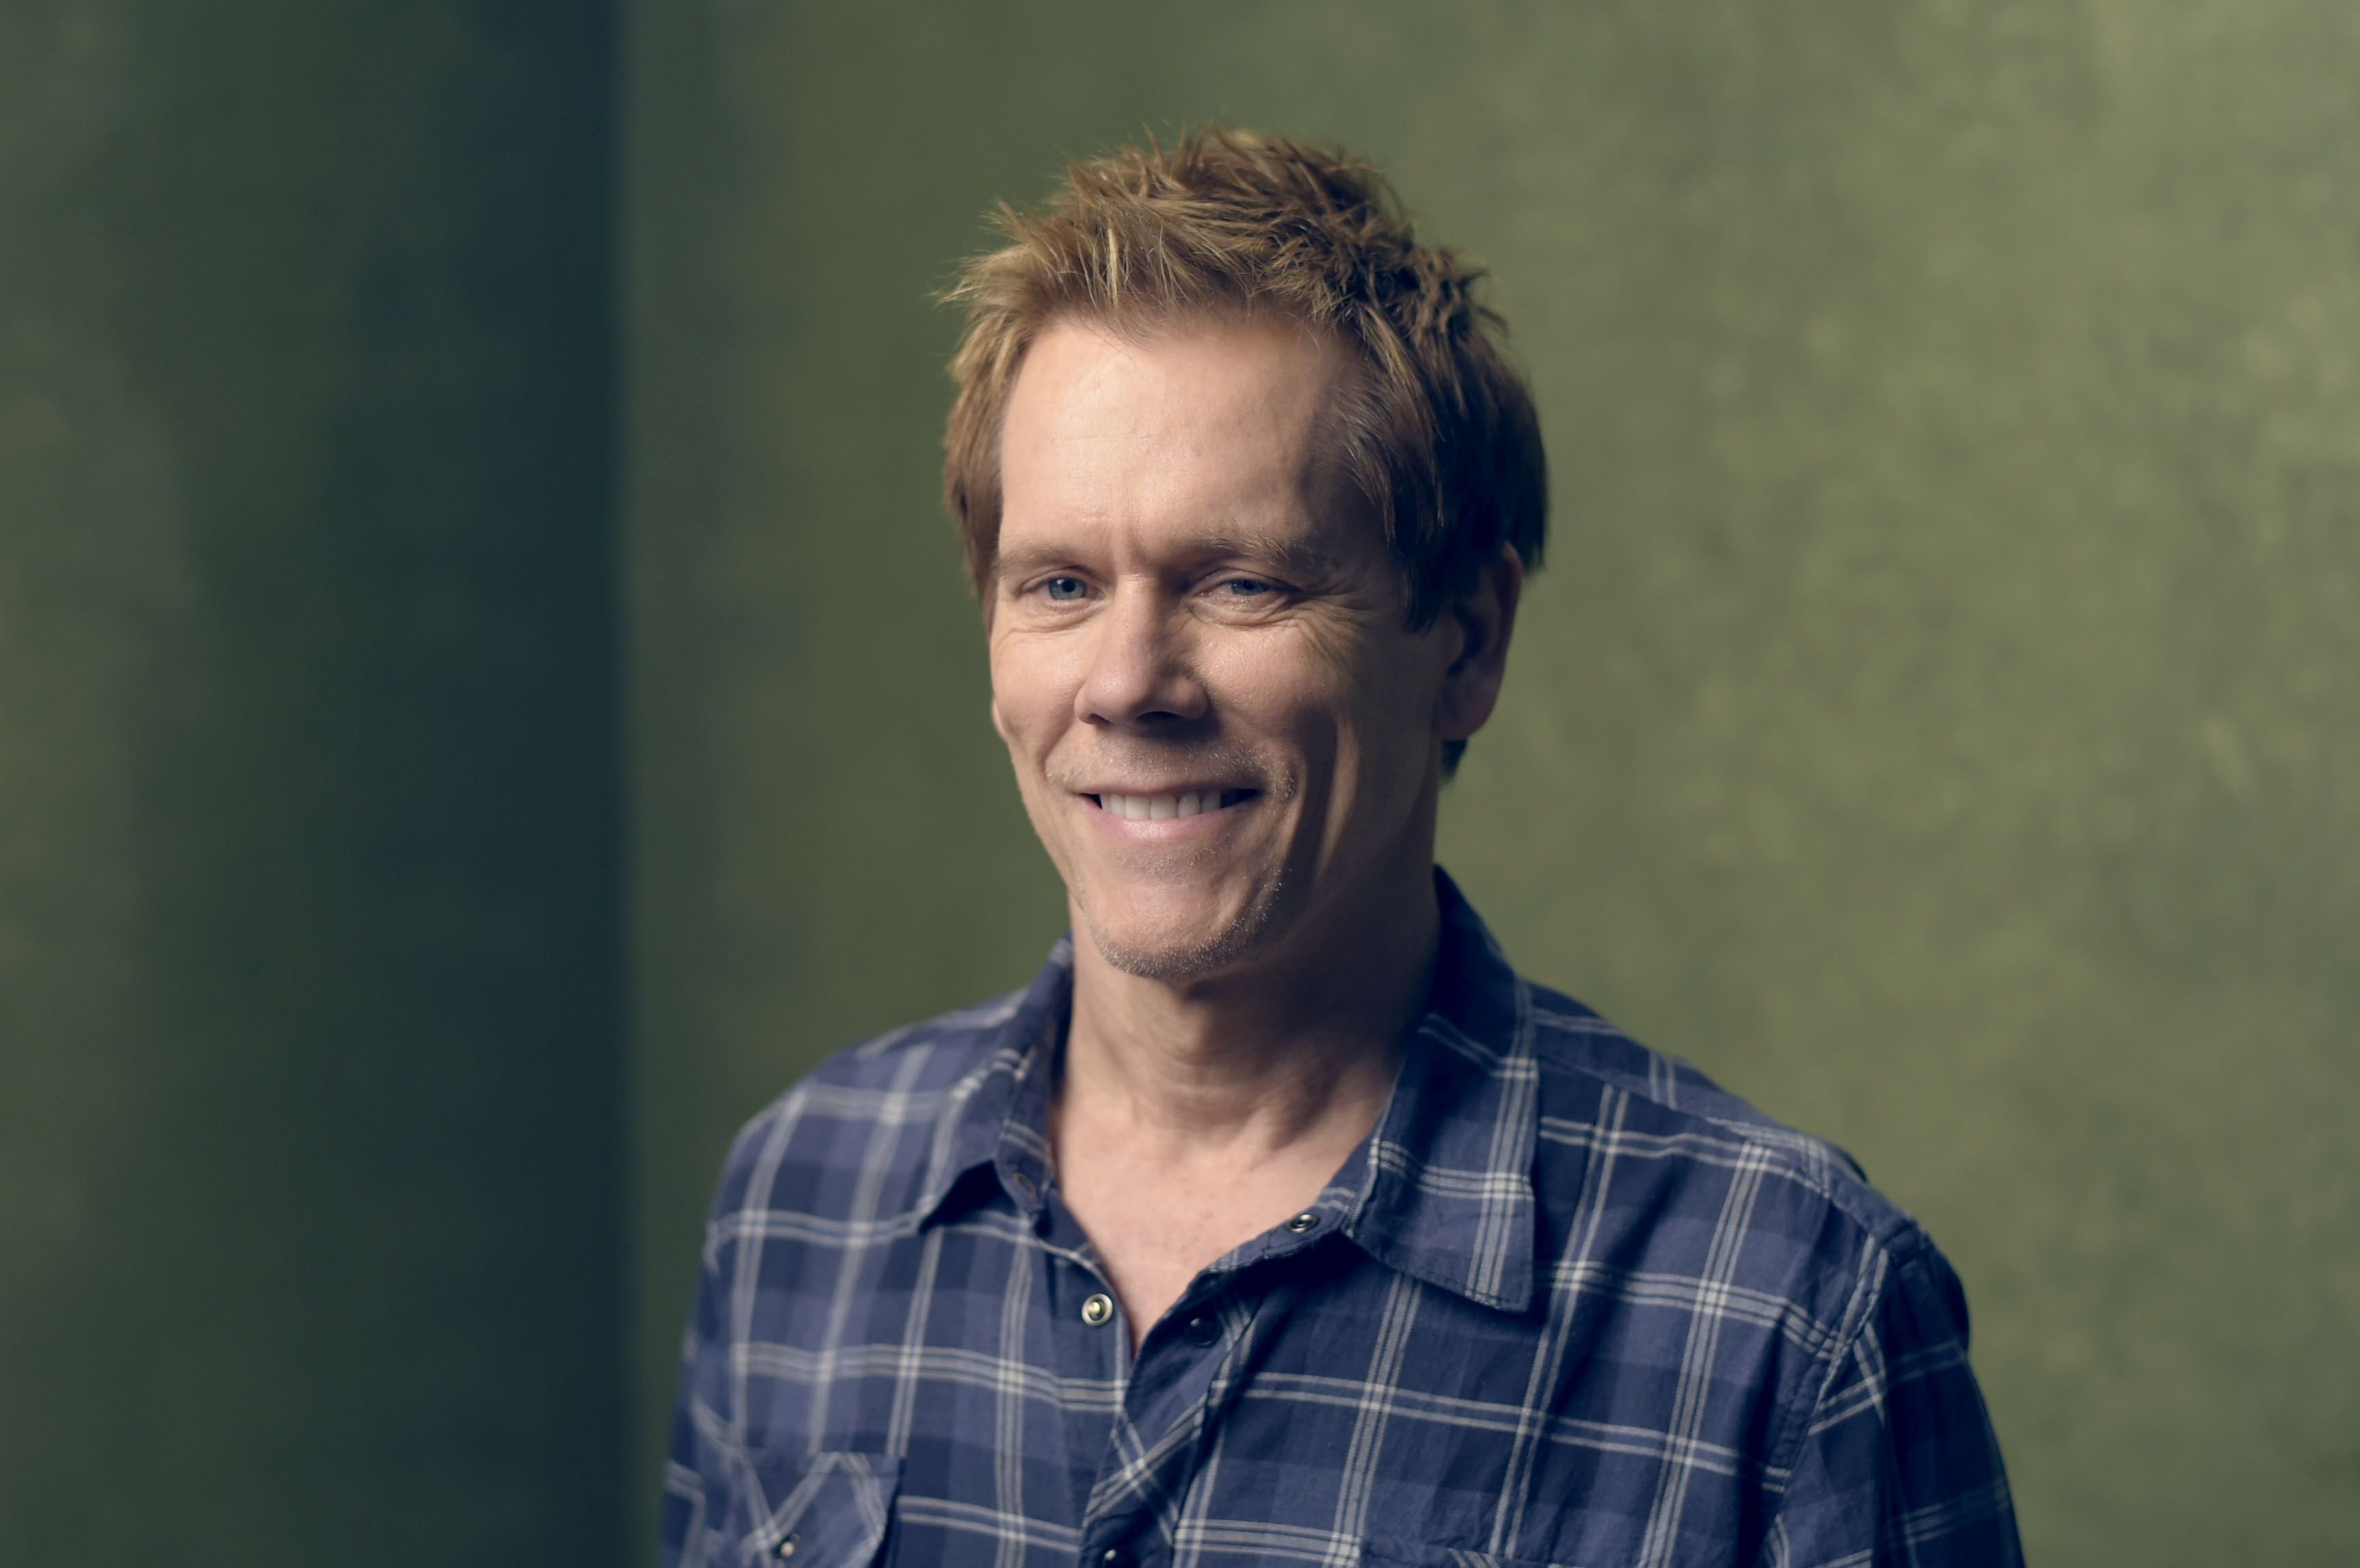 Actor Kevin Bacon from "Cop Car" poses for a portrait at the Village at the Lift Presented by McDonald's McCafe during the 2015 Sundance Film Festival on January 24, 2015 | Photo: Getty Images